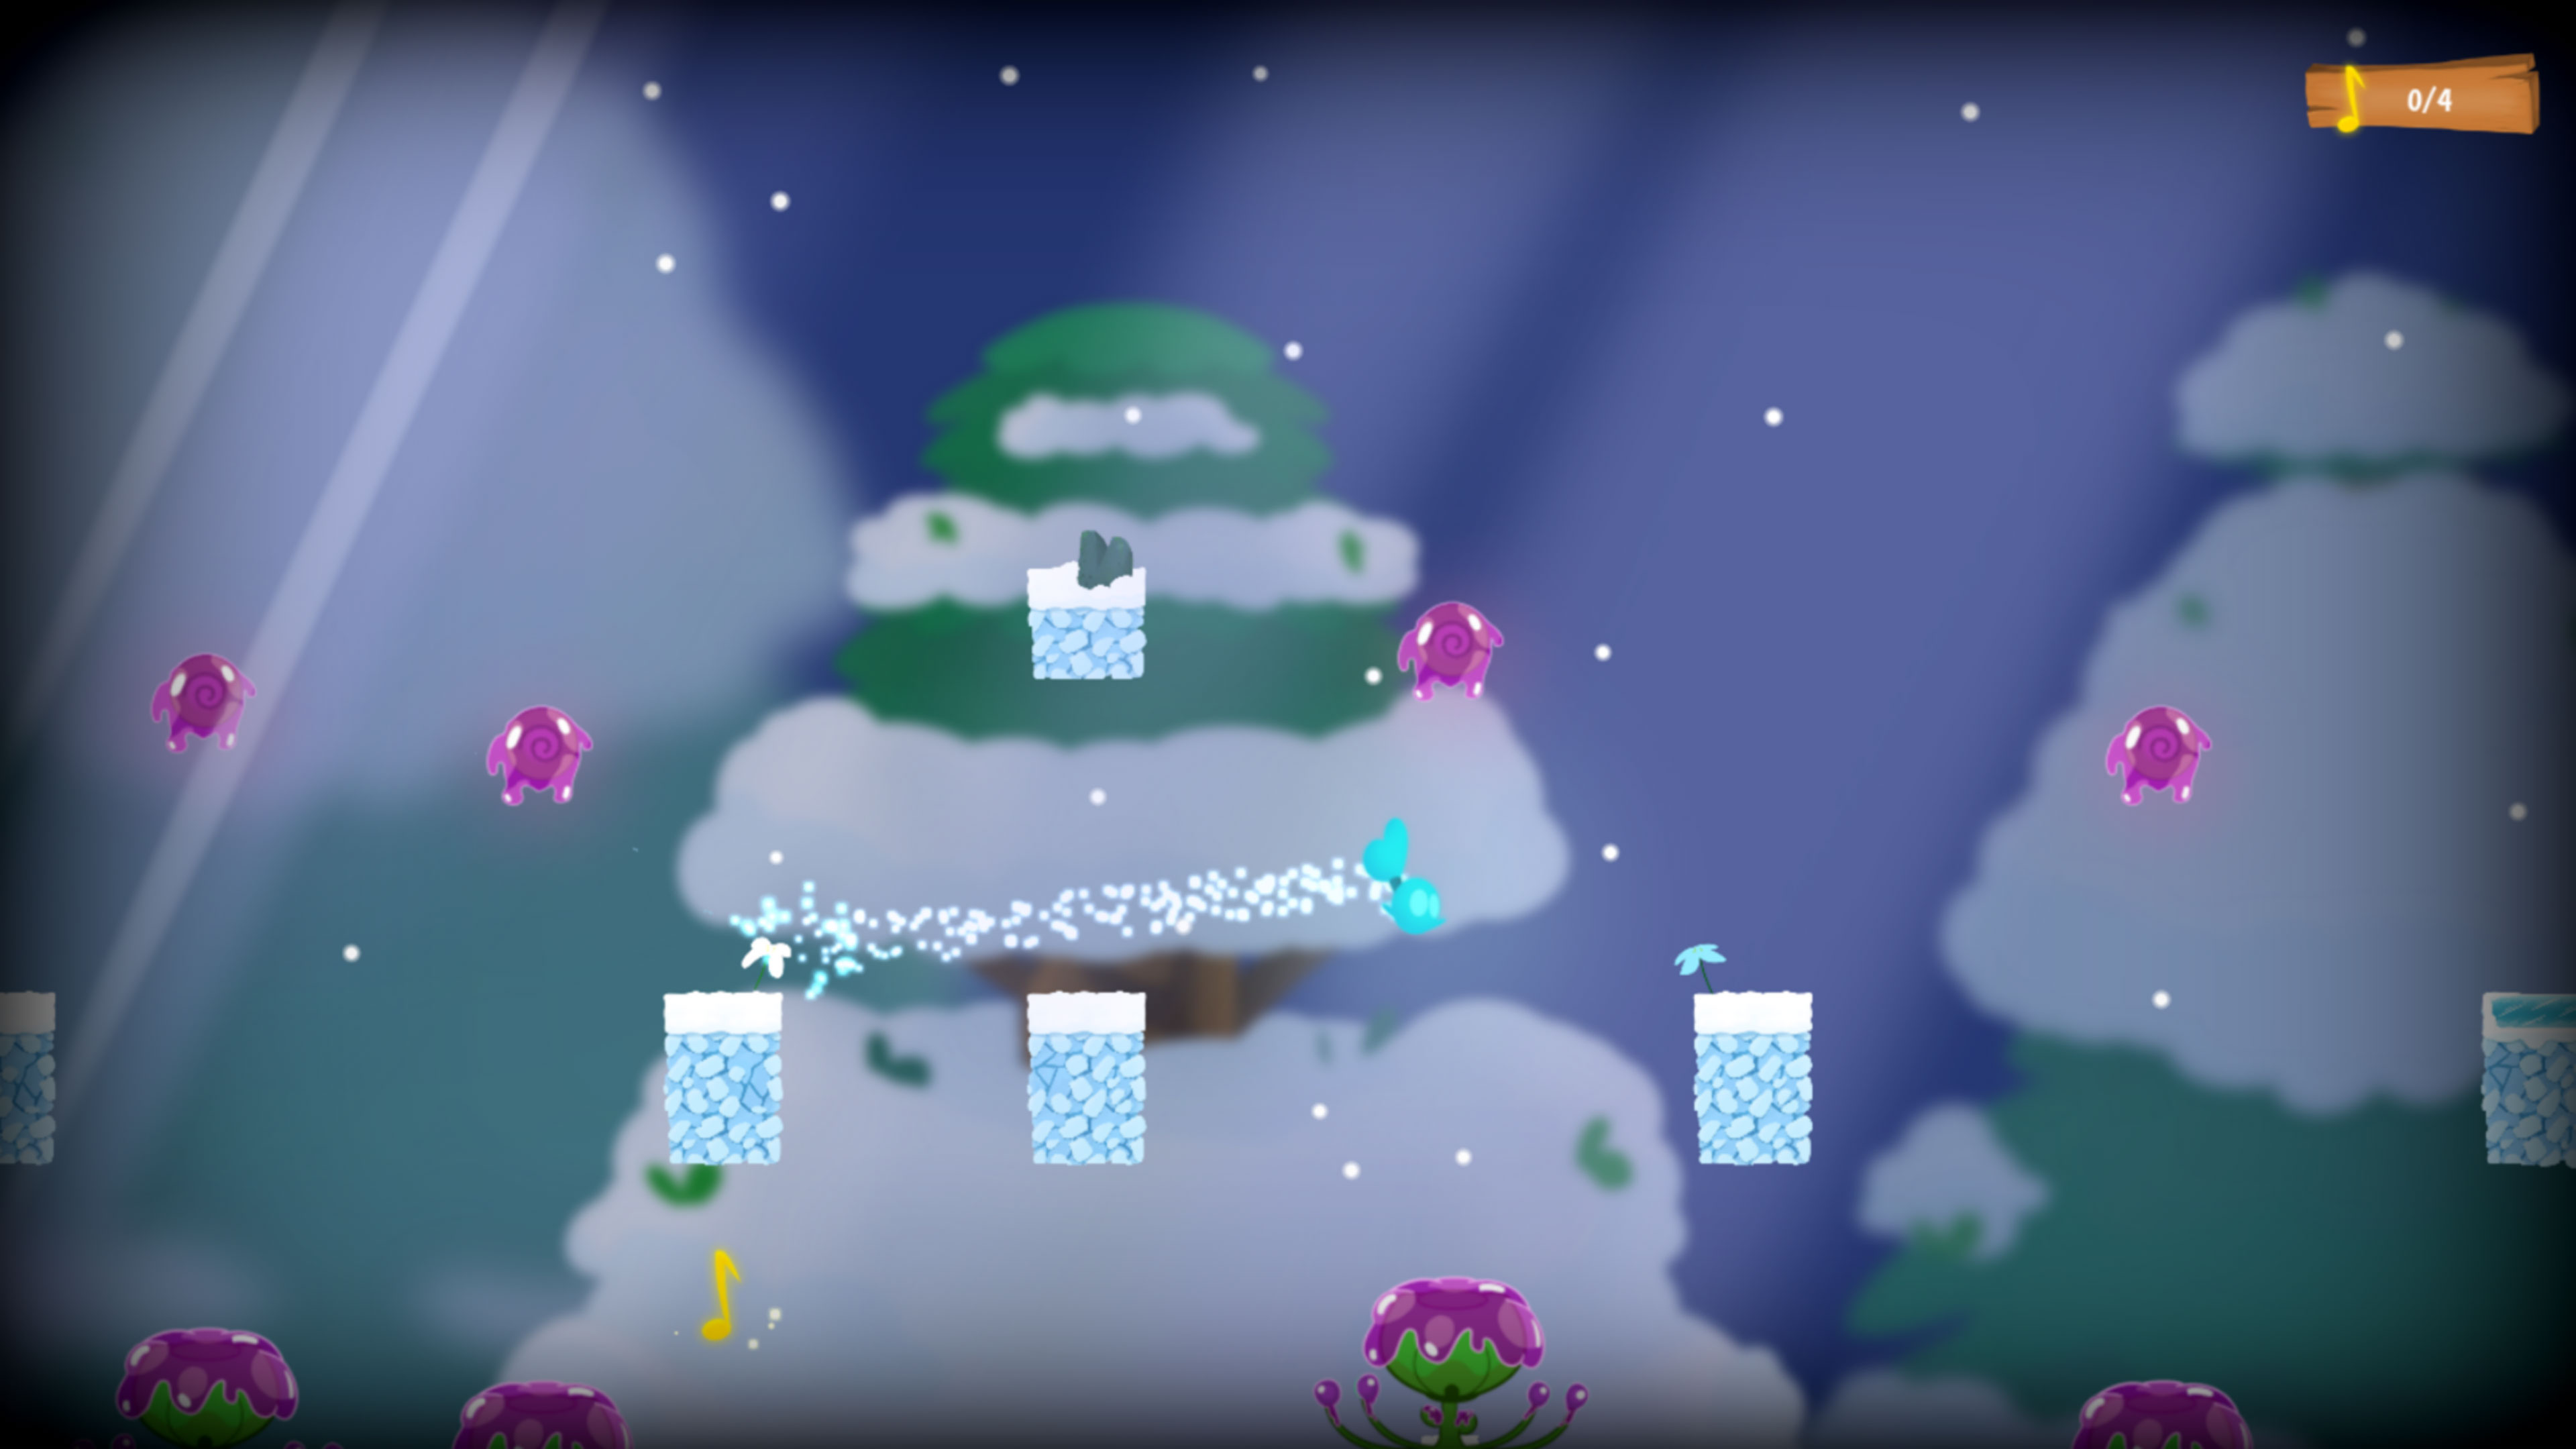 Screenshot from a snowy level